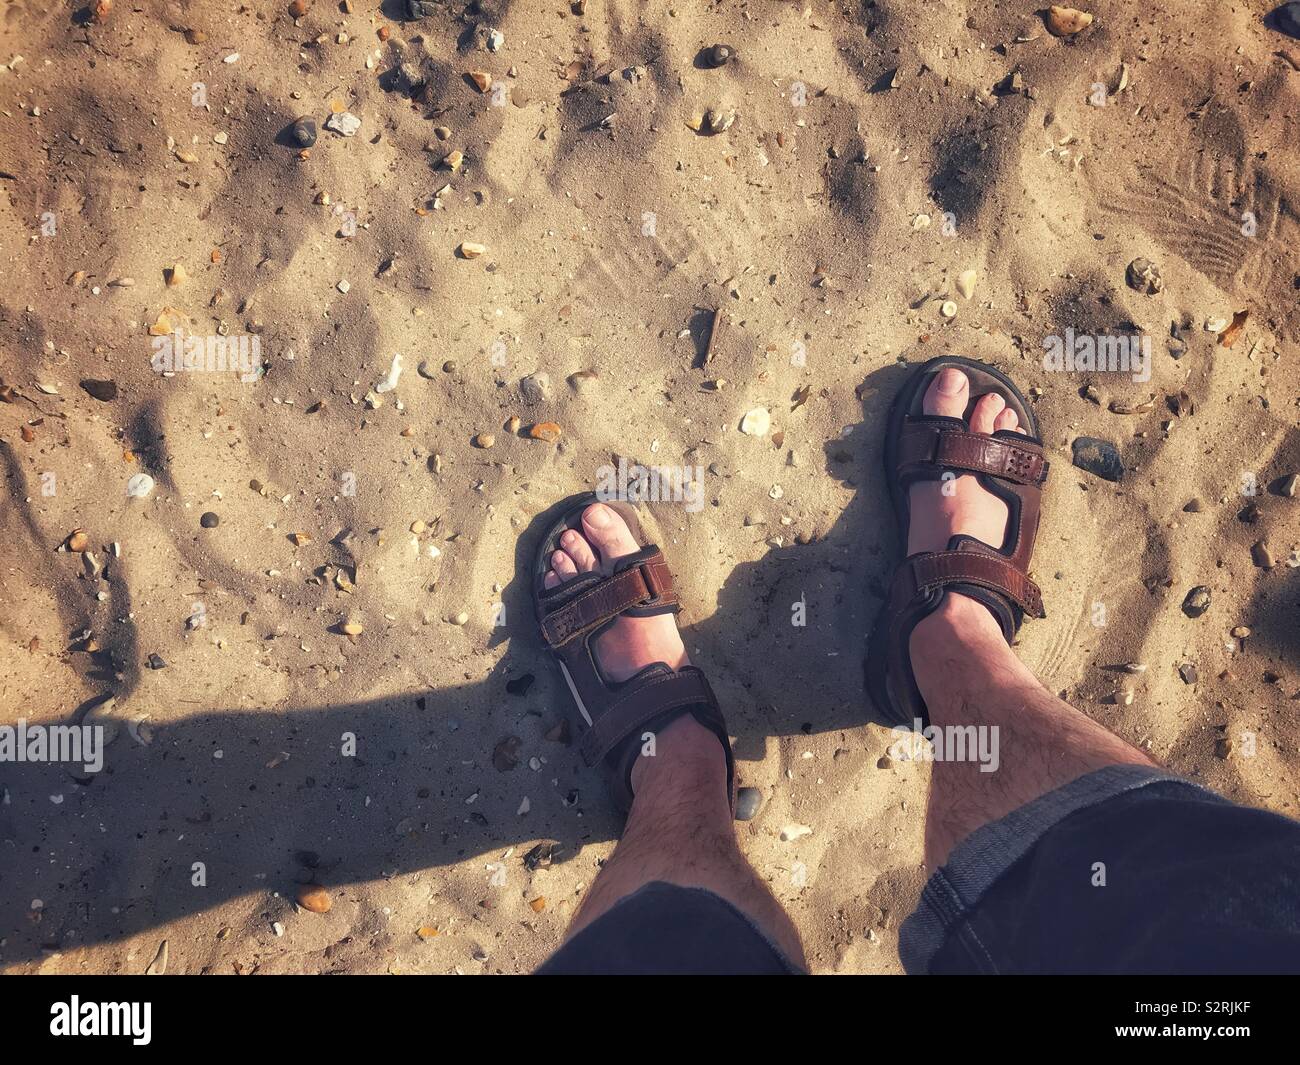 A pair of male feet wearing sandals on a sandy beach. Stock Photo